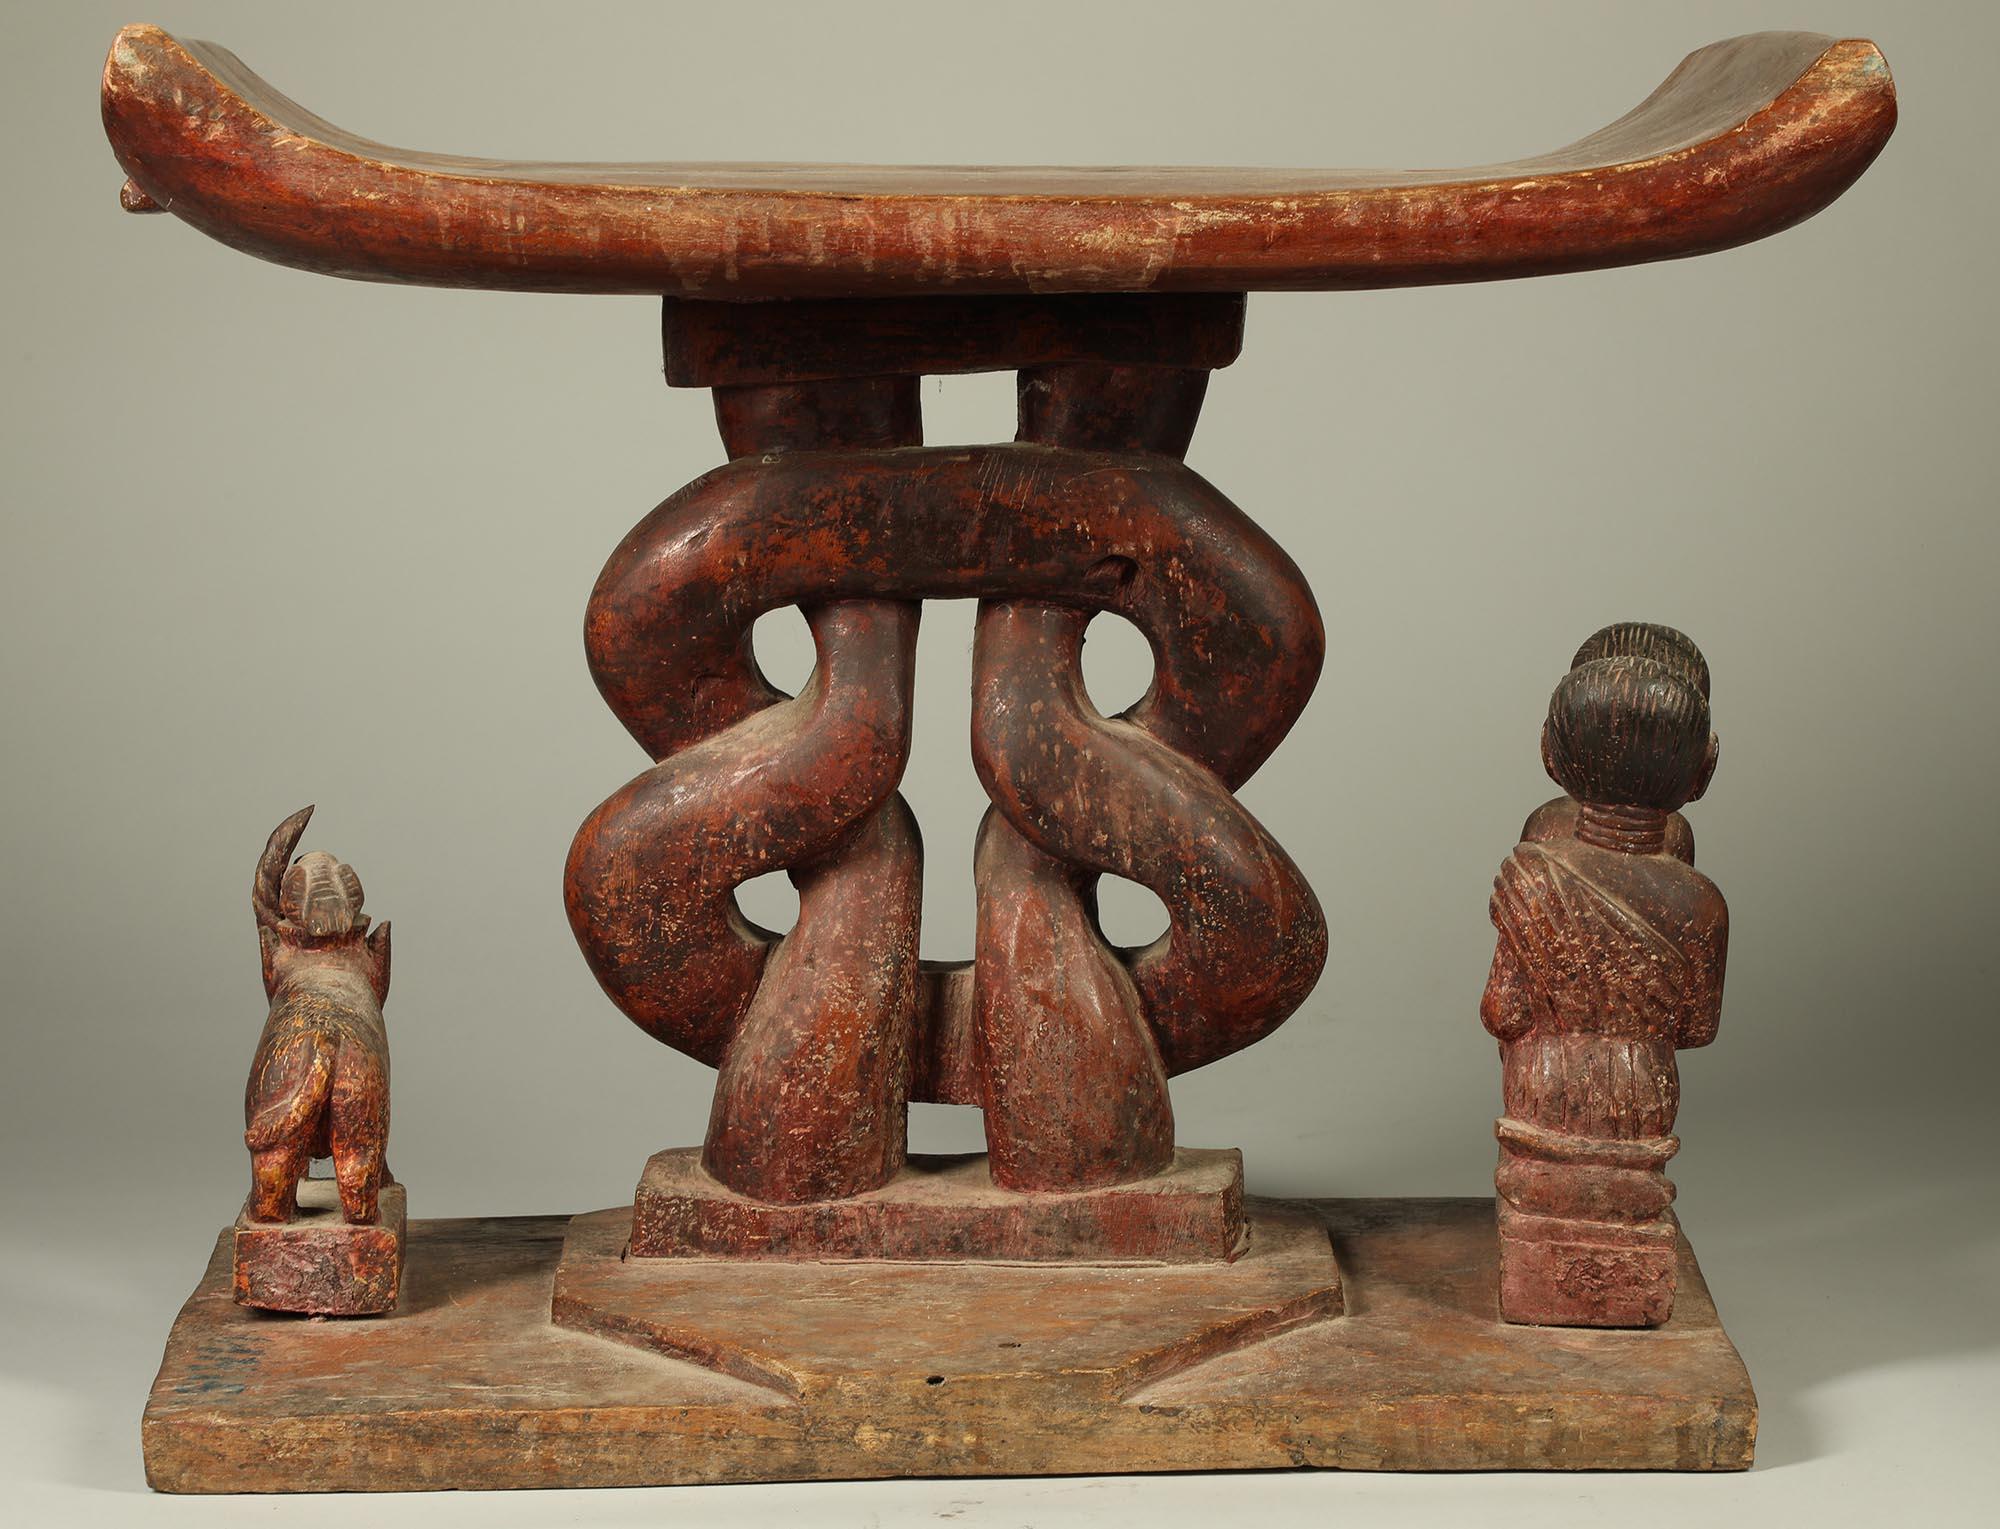 Hand-Carved Old Classic Wood Ashanti Stool with King Figure & Endless Knot Mid-20th century